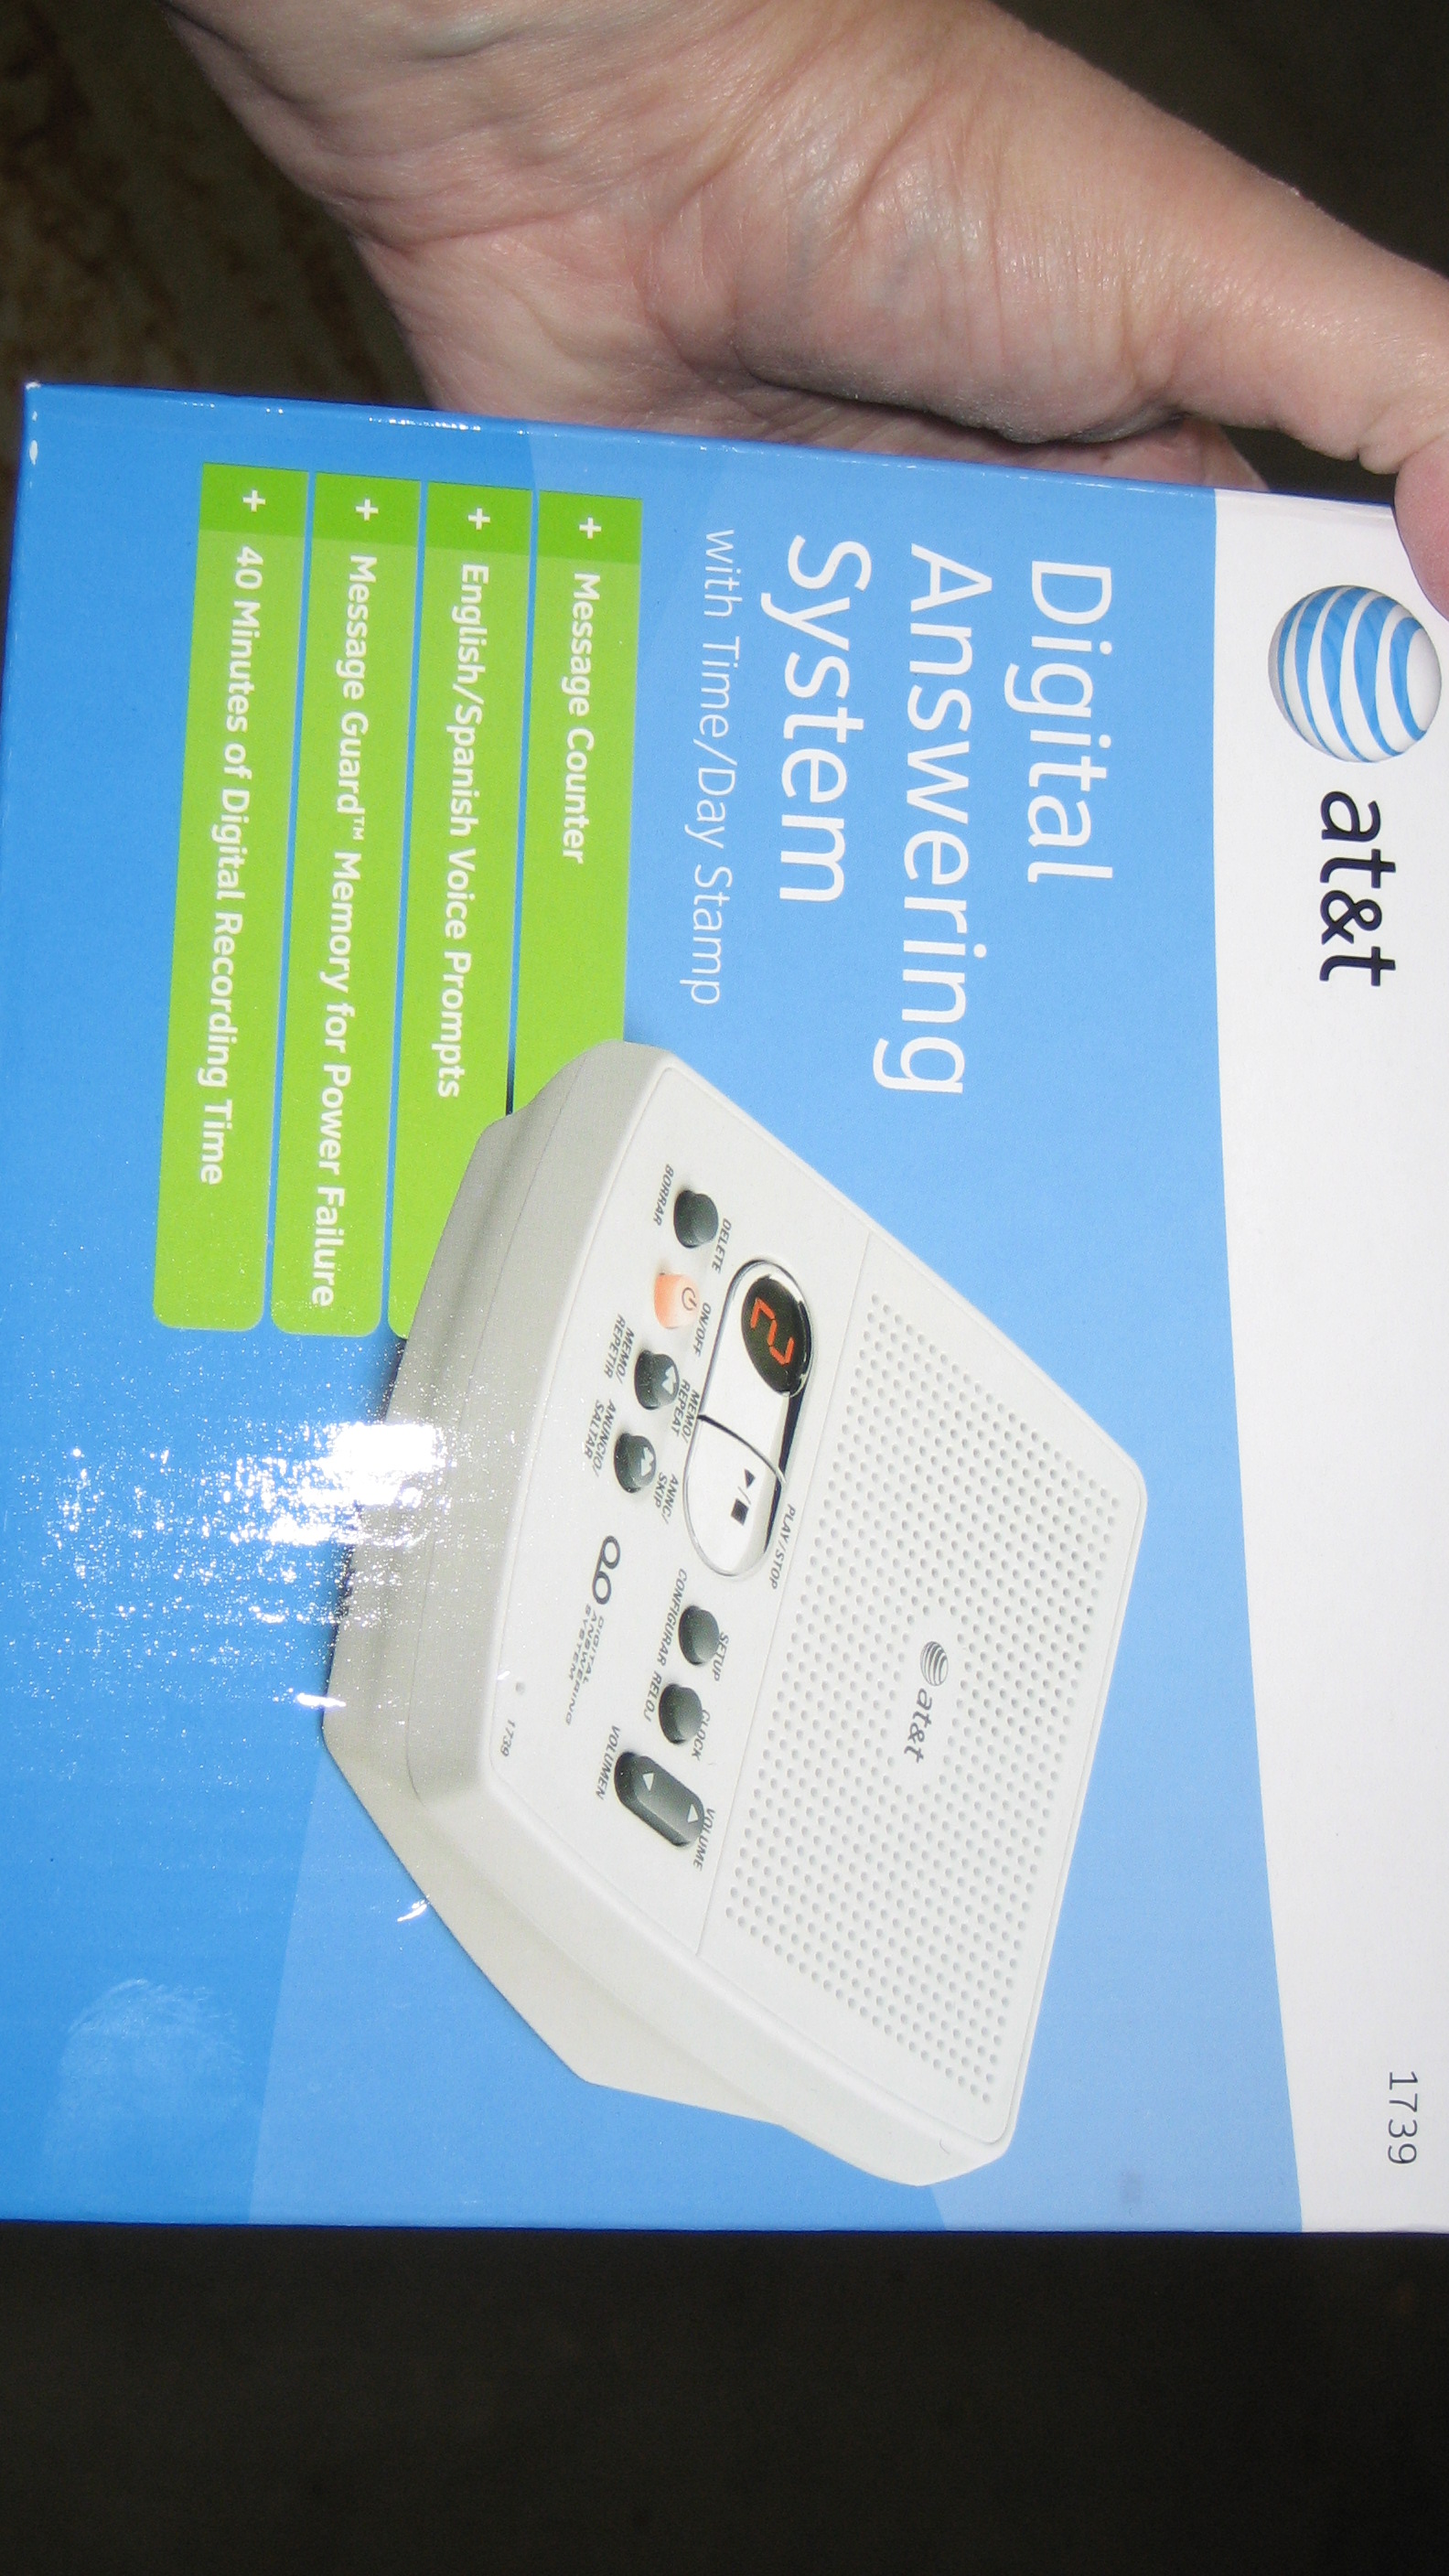 Brand new in box: Telephone Answering Machine from AT&T